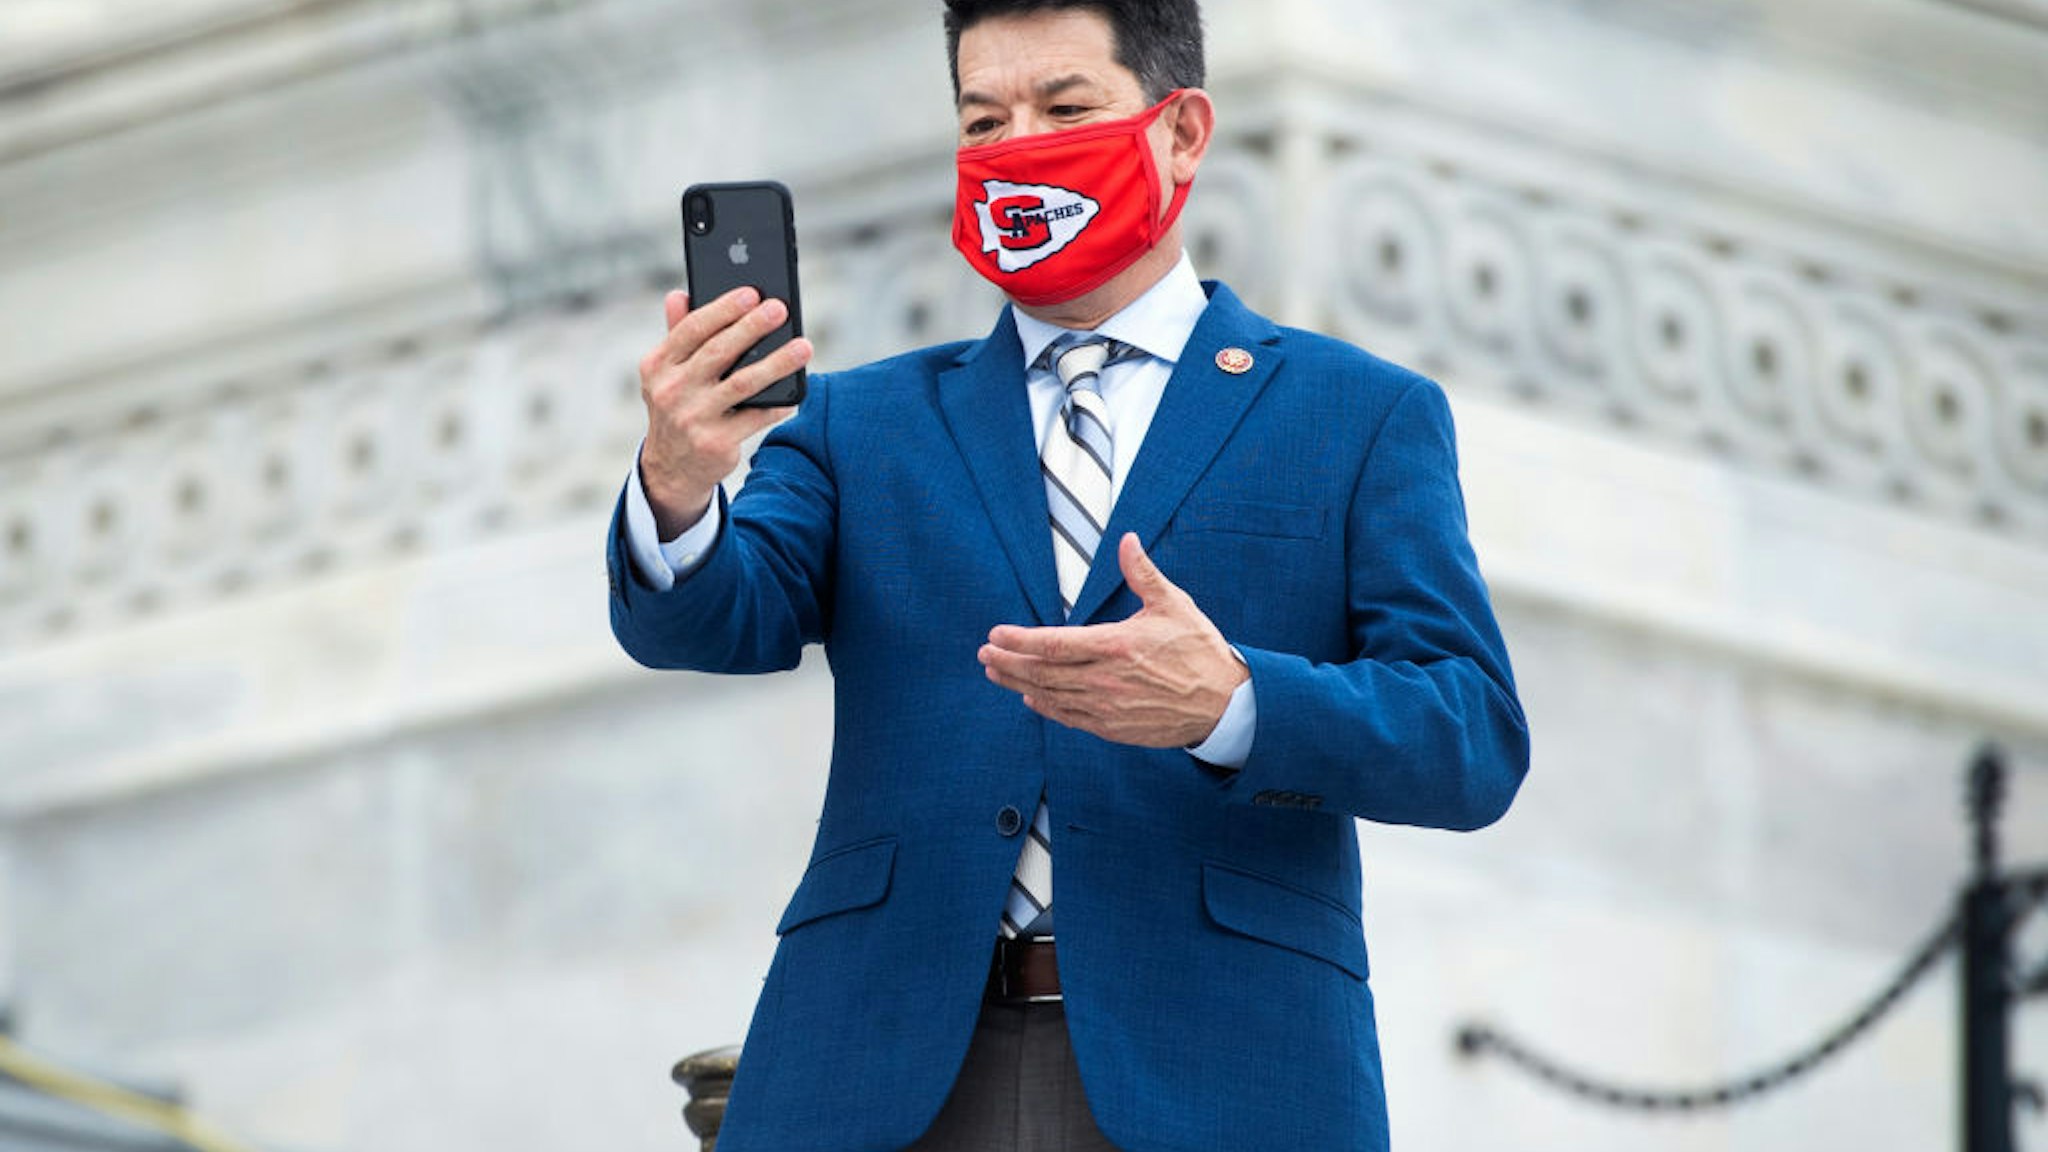 Rep. T.J. Cox, D-Calif., films a message outside the Capitol as the House voted on a bill to ban changes to U.S. Postal Service operations and provide $25 billion in funding on Saturday, August 22, 2020.